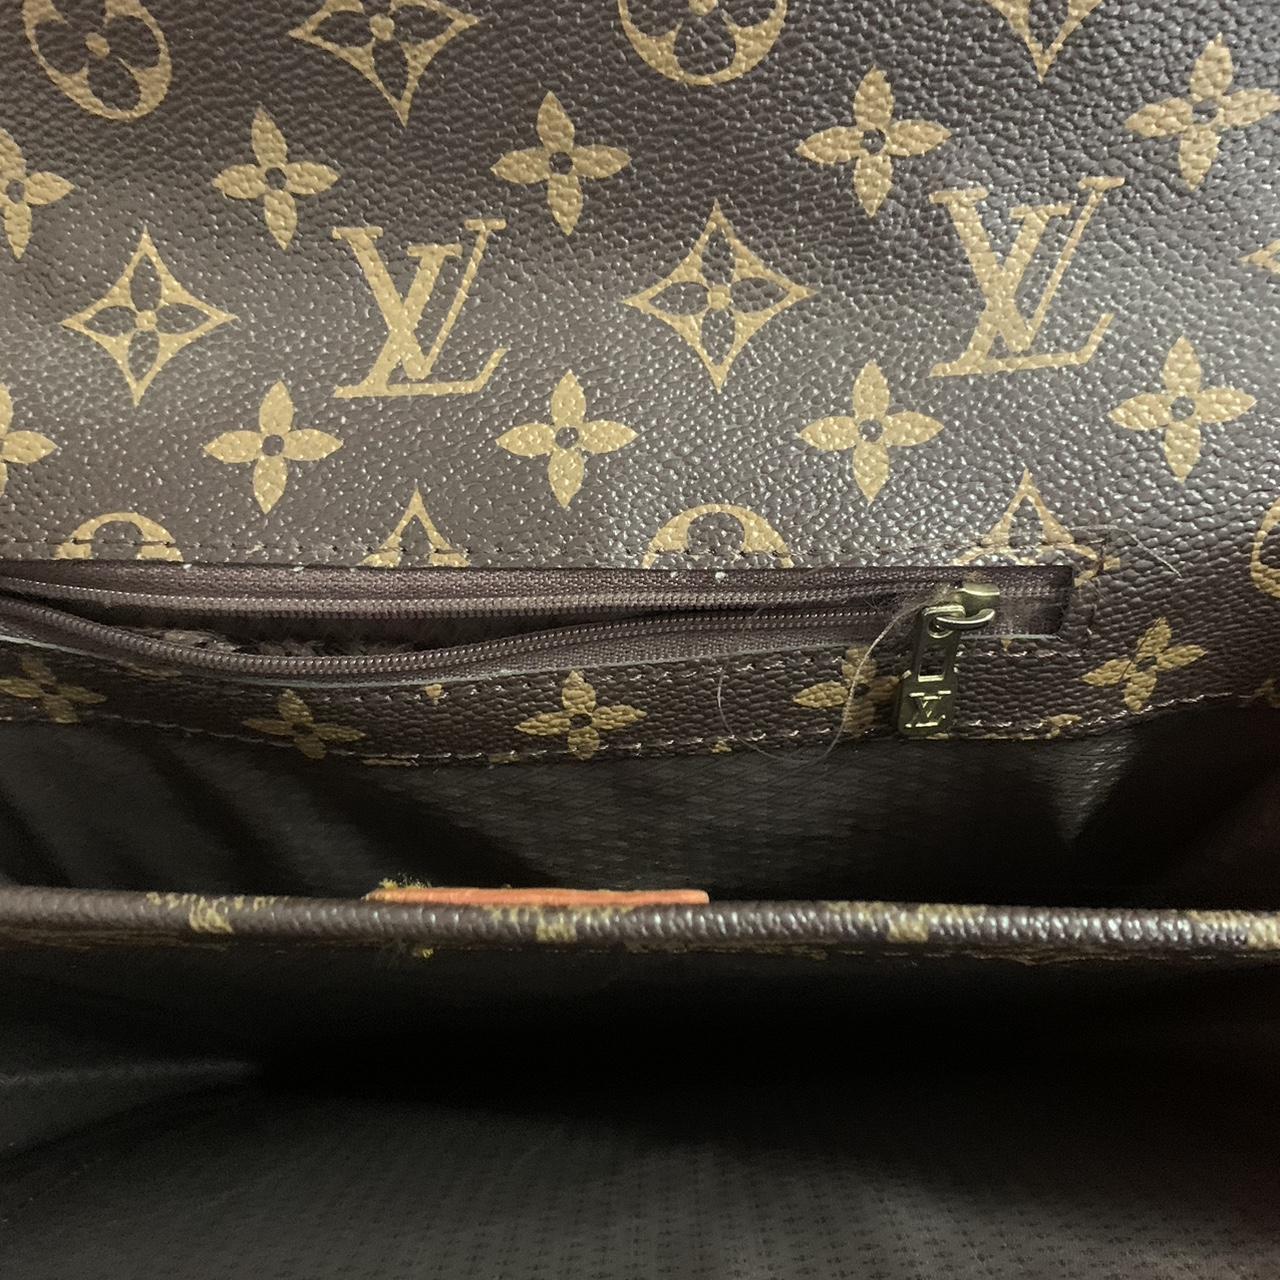 LV purse Fits tablet and notebooks Medium size - Depop